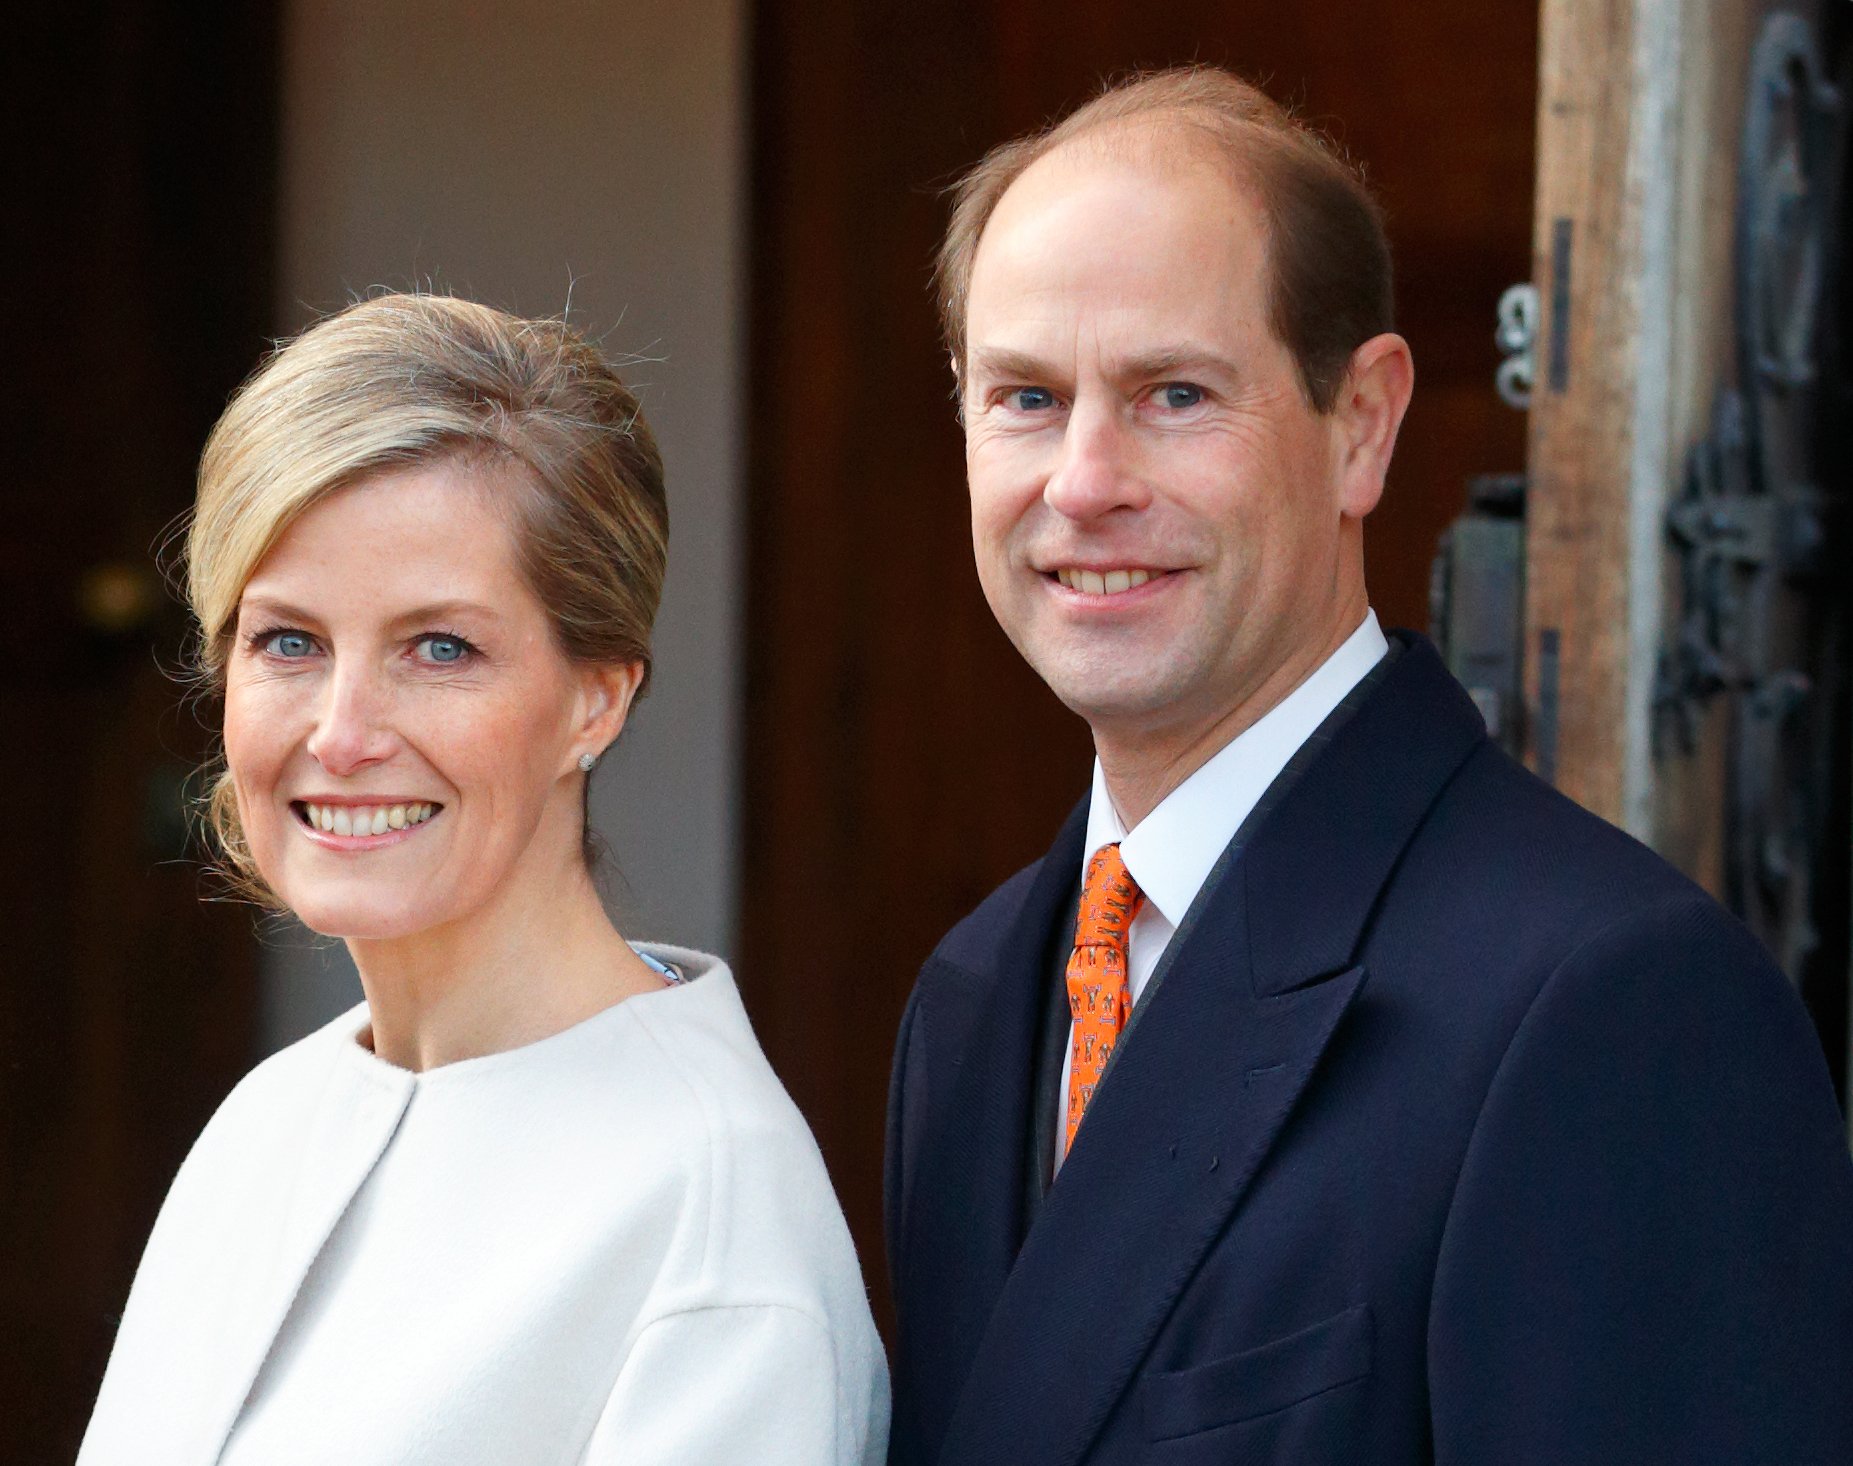 Sophie, Countess of Wessex and her husband Prince Edward, Earl of Wessex visiting the Tomorrow's People Social Enterprises at St Anselm's Church, Kennington on the Countess's 50th birthday on January 20, 2015 in London, England. / Source: Getty Images